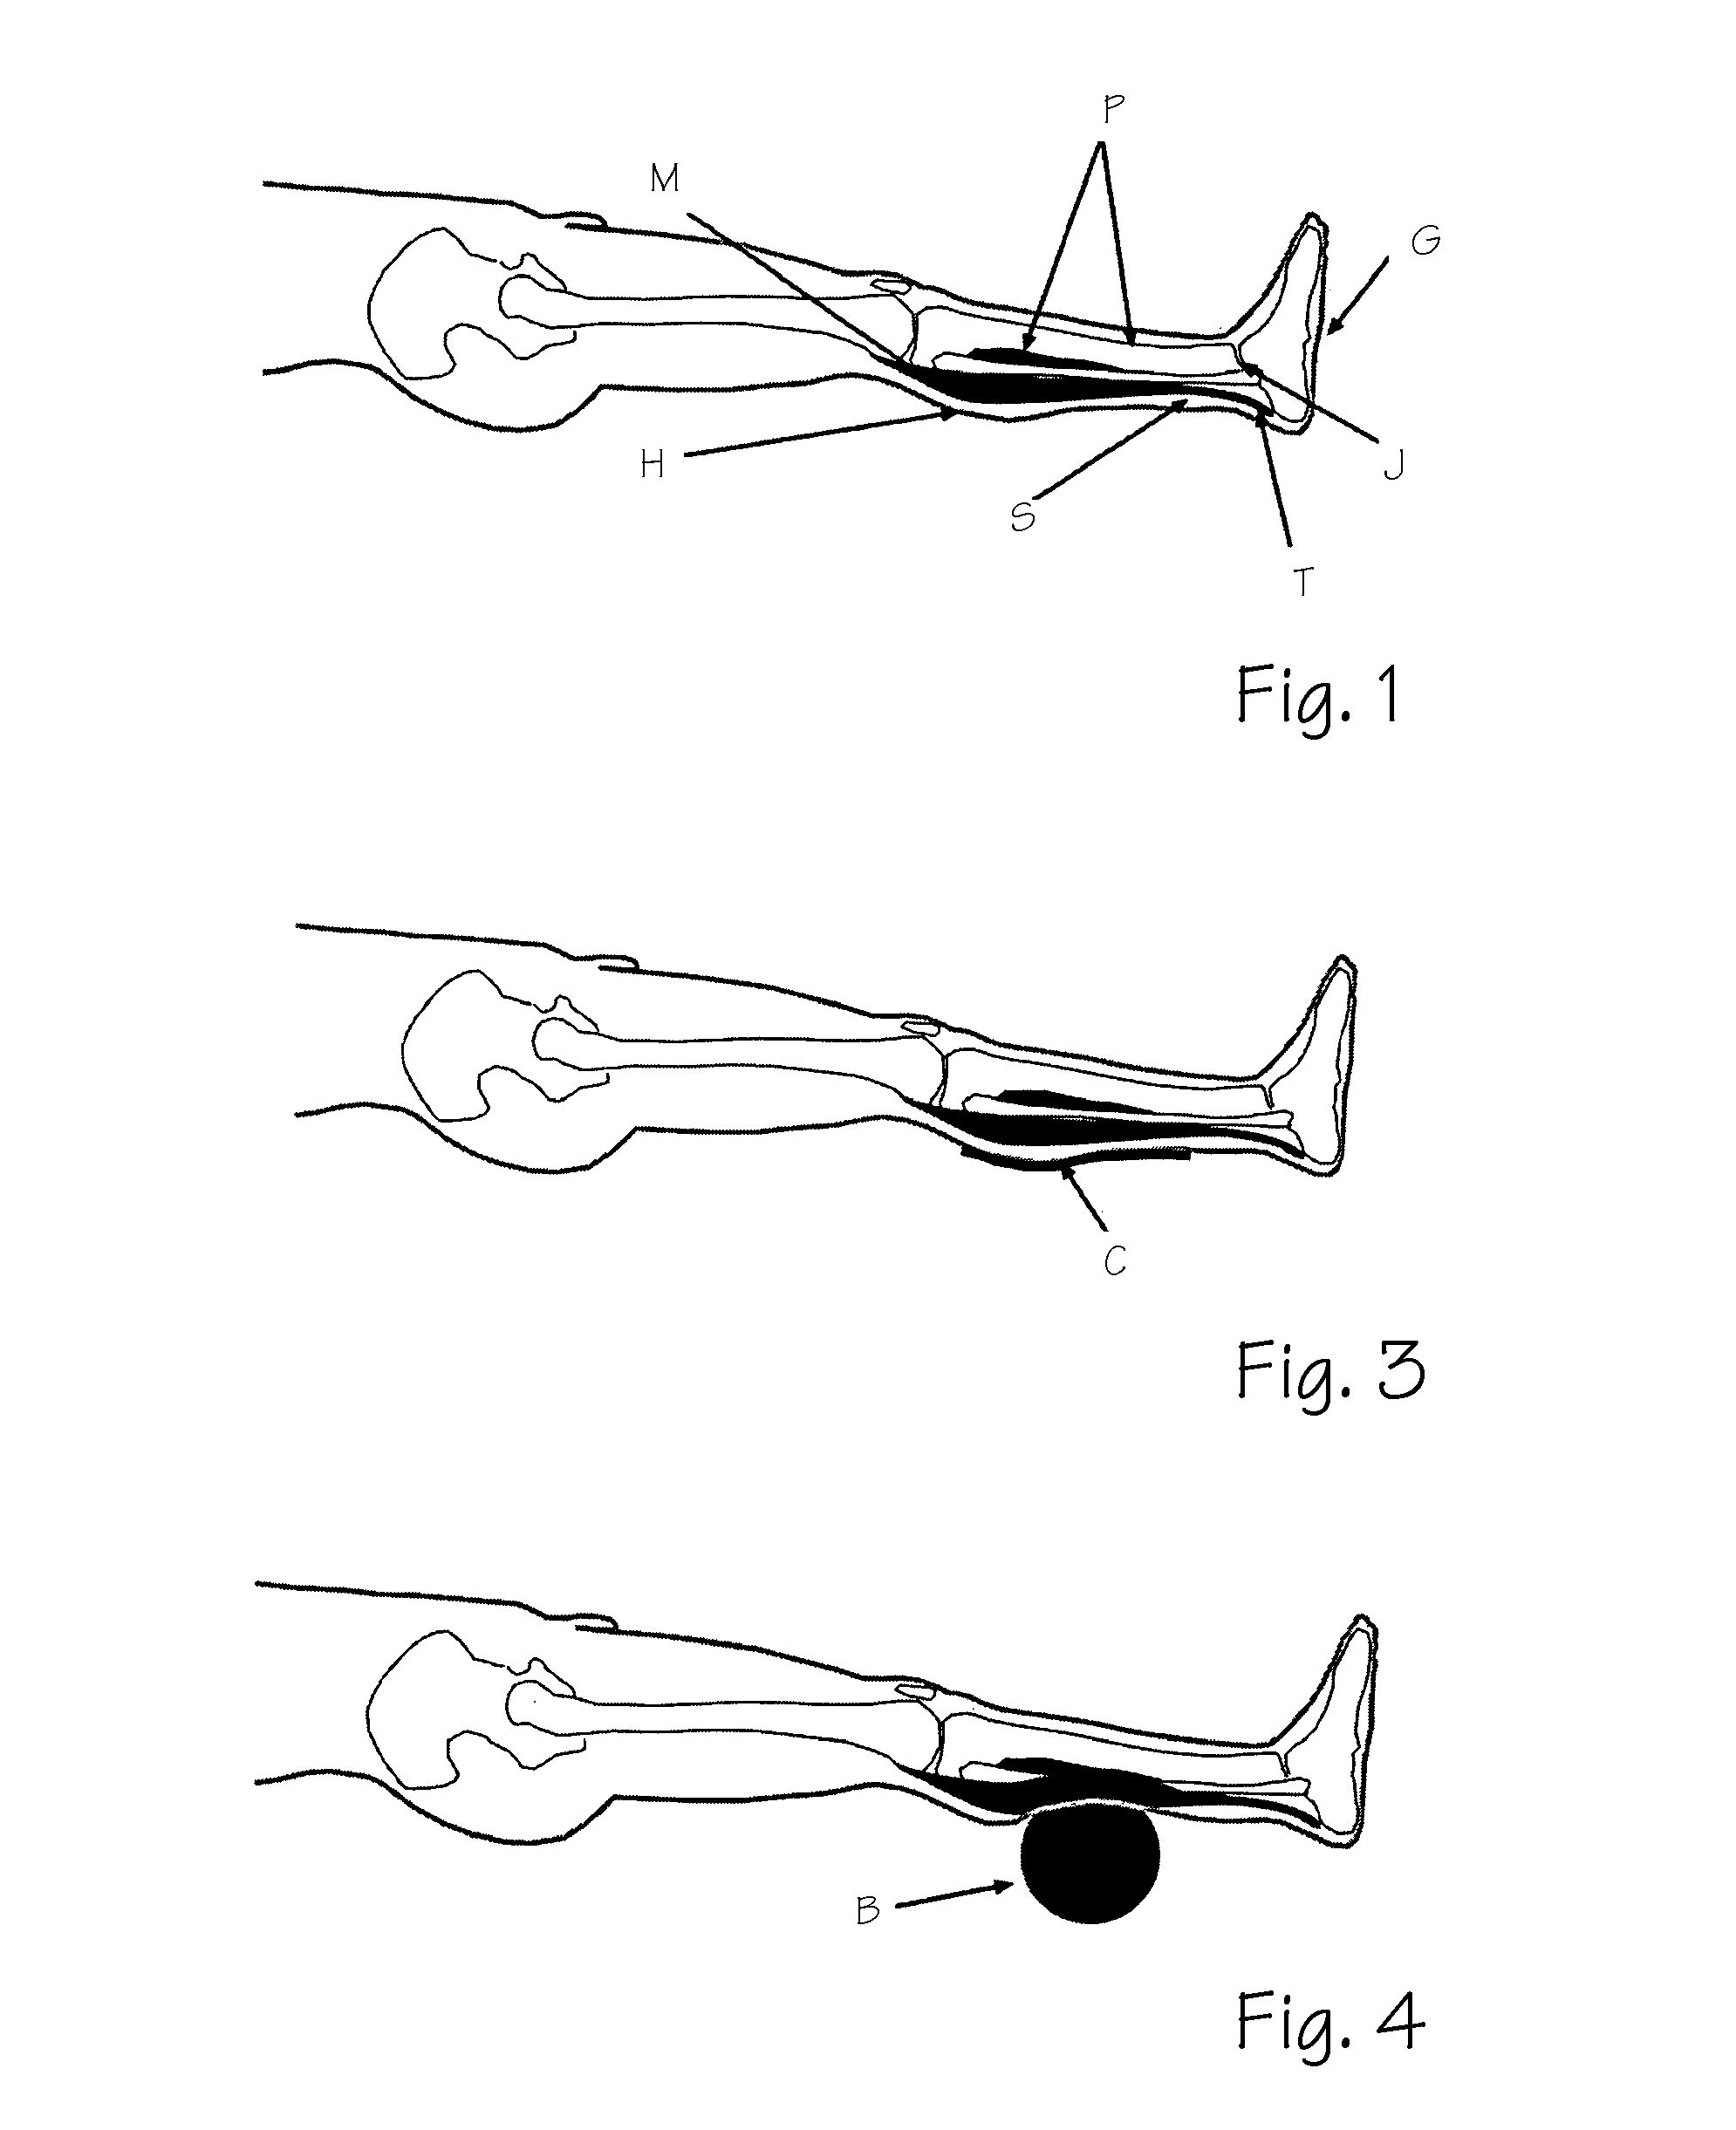 Devices and methods for treating restless leg syndrome